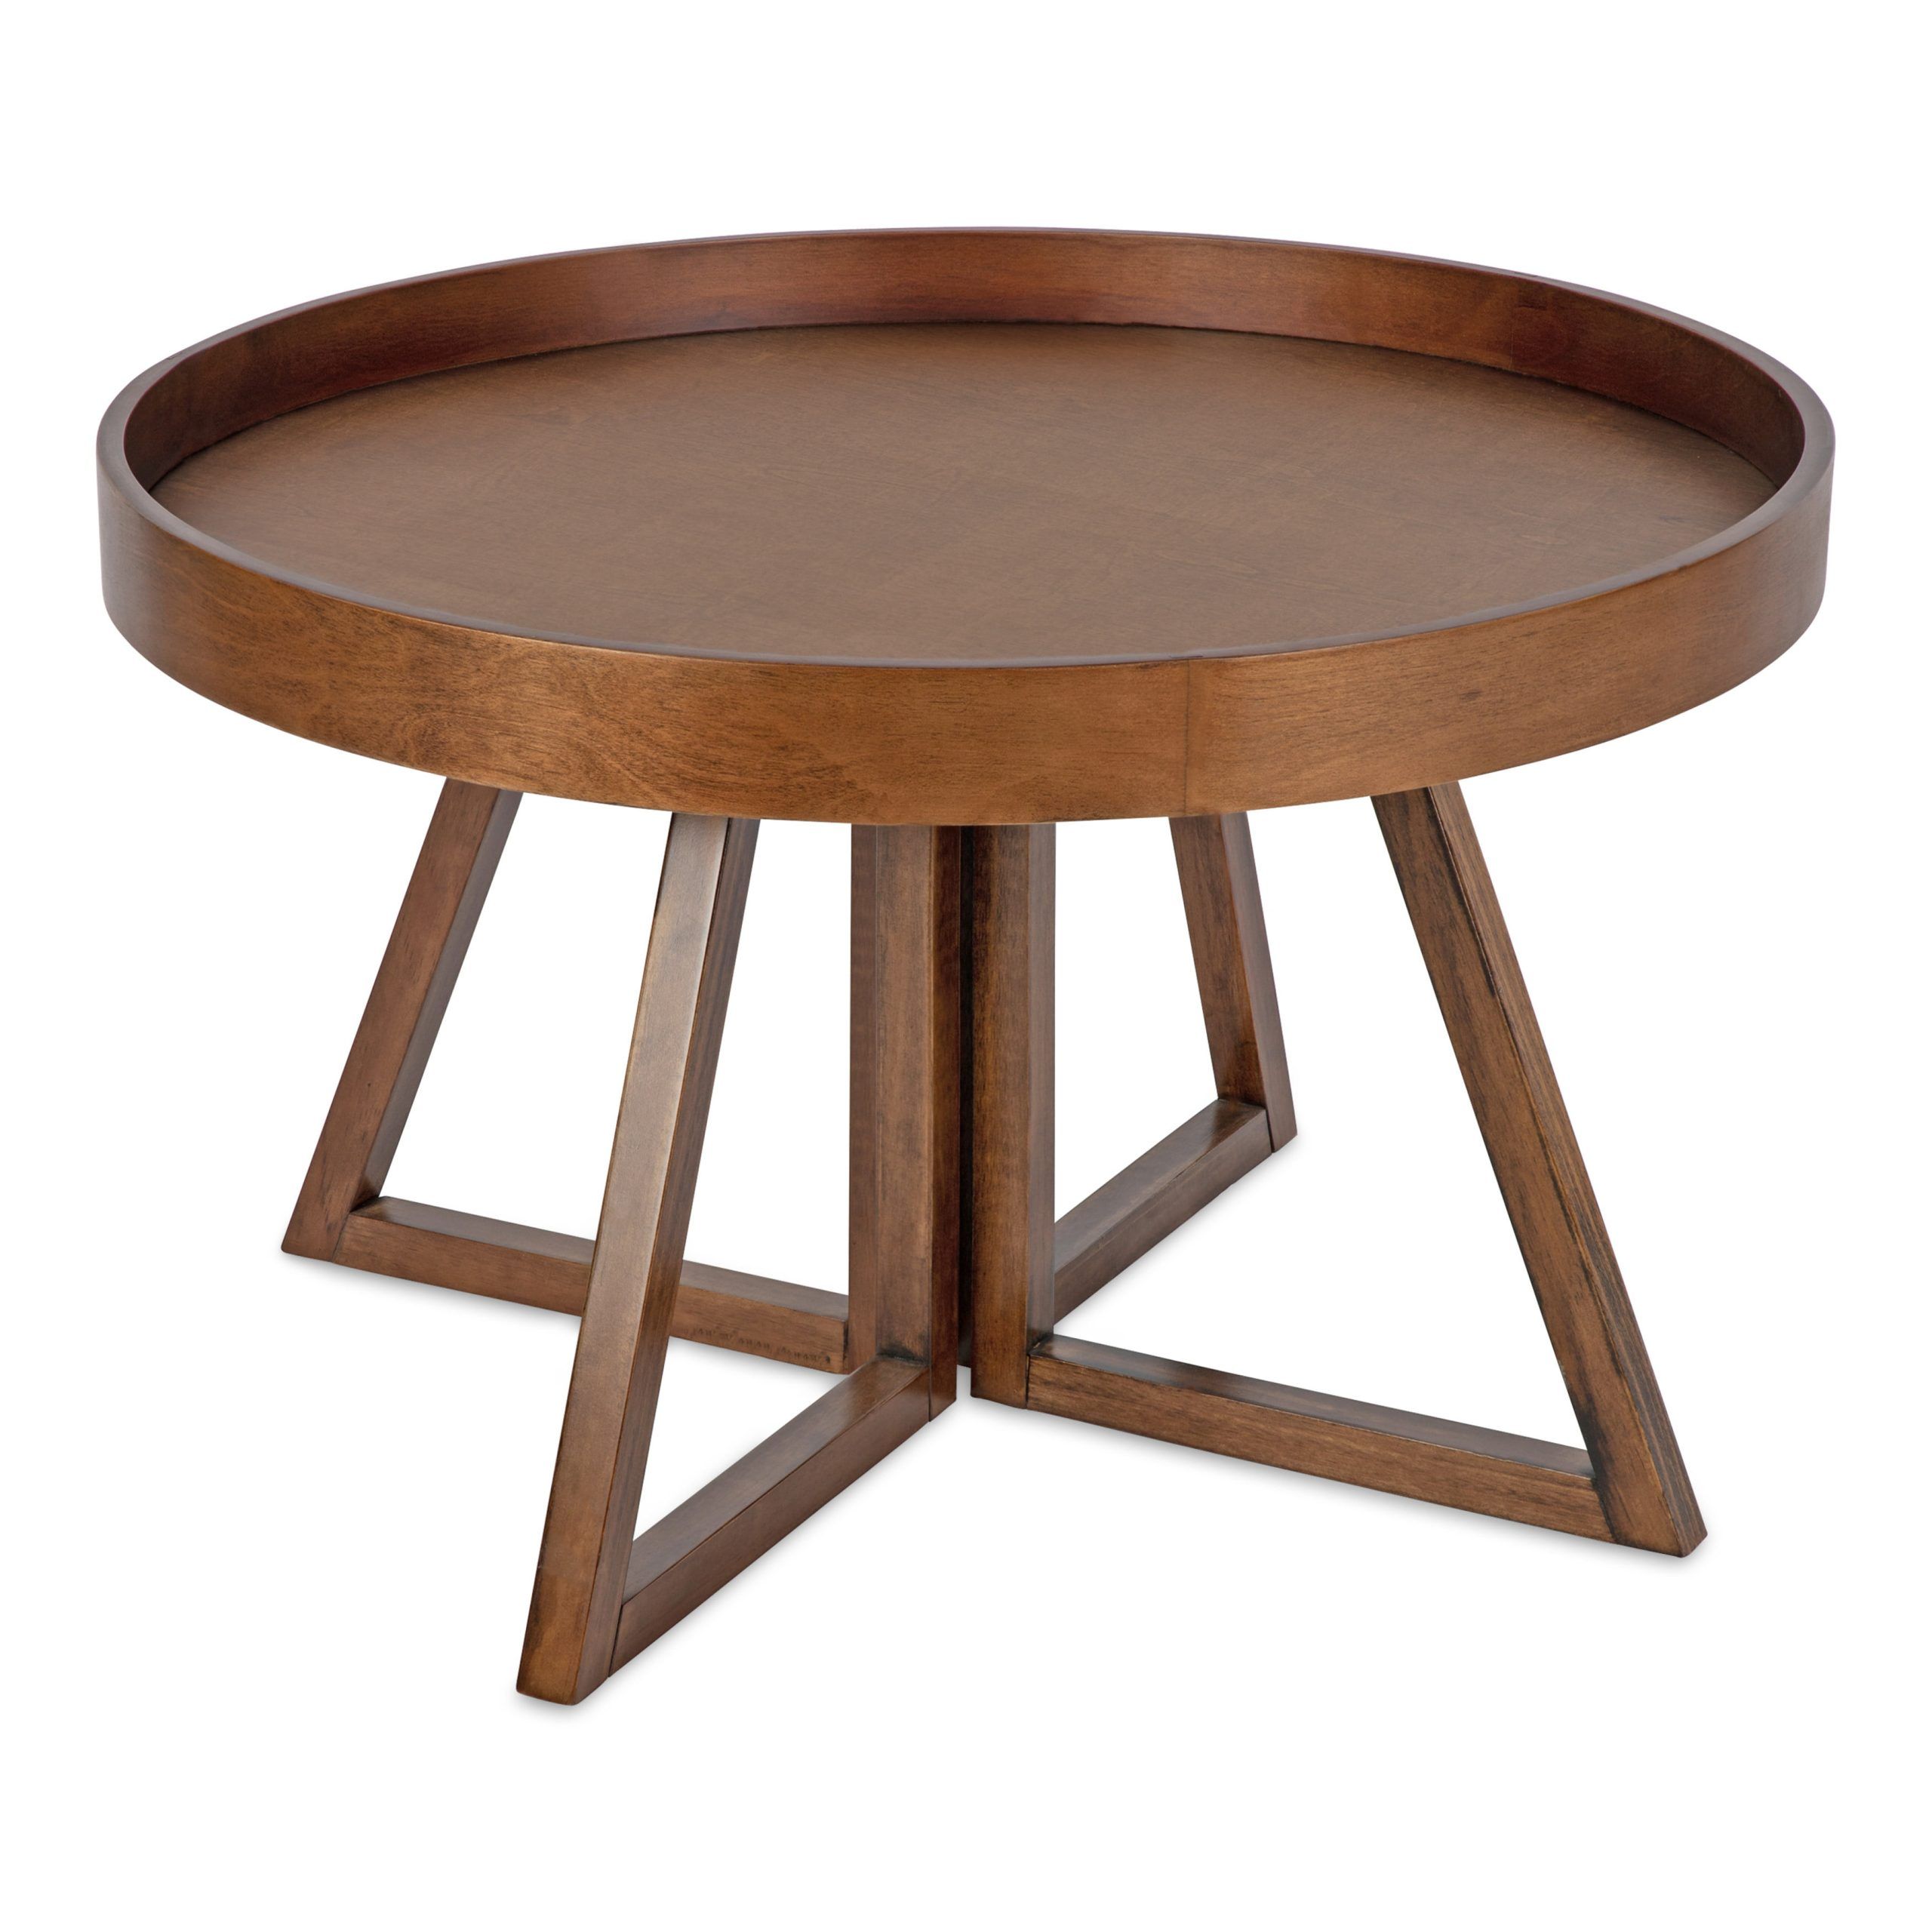 Kate And Laurel Avery Modern Round Coffee Table, 30" X 30" X 18 In American Heritage Round Coffee Tables (View 17 of 20)